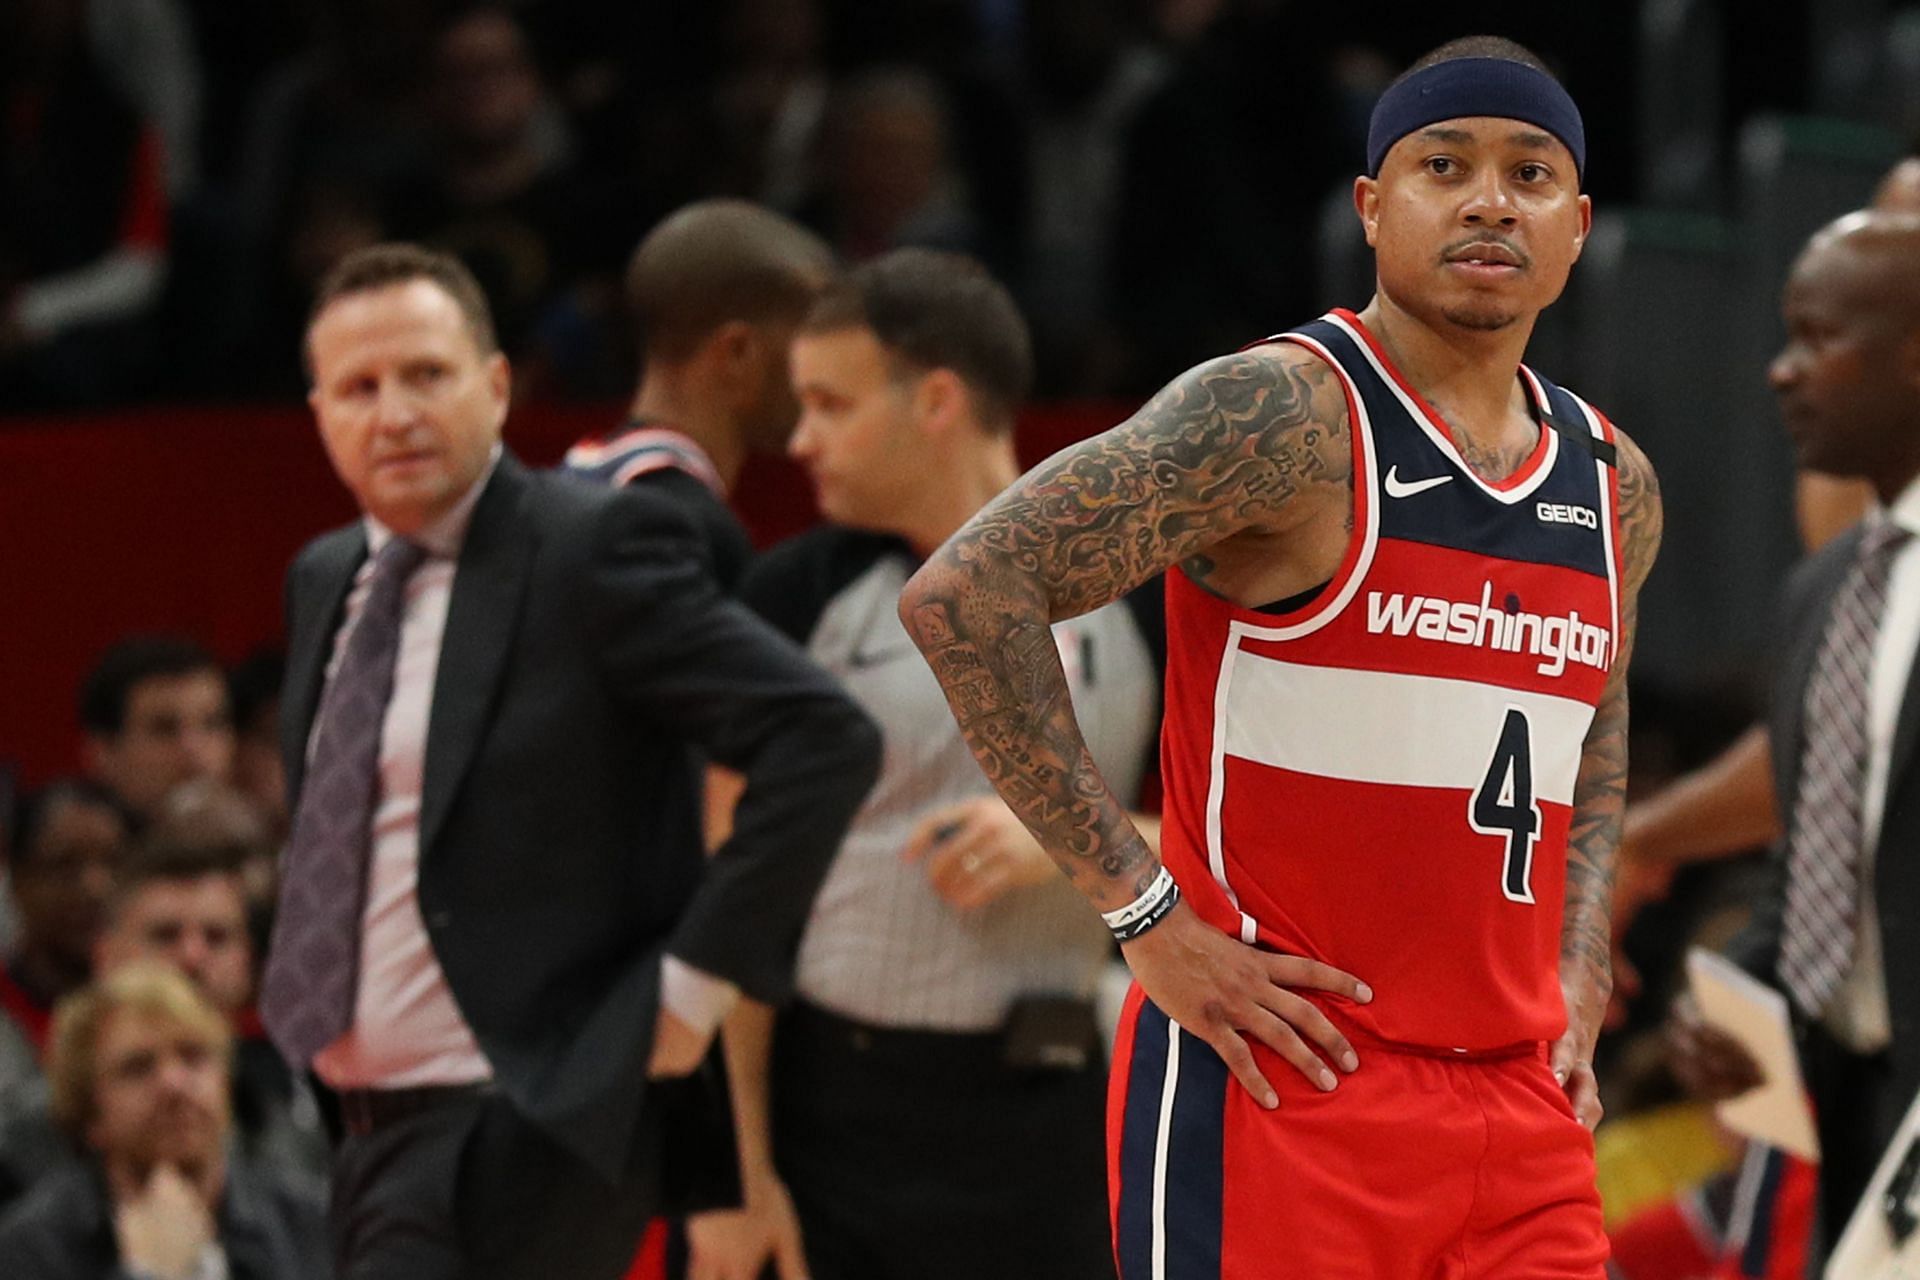 Isaiah Thomas #4 of the Washington Wizards (R) and Scott Brooks of the Washington Wizards look on against the Denver Nuggets during the second half at Capital One Arena on January 04, 2020 in Washington, DC.